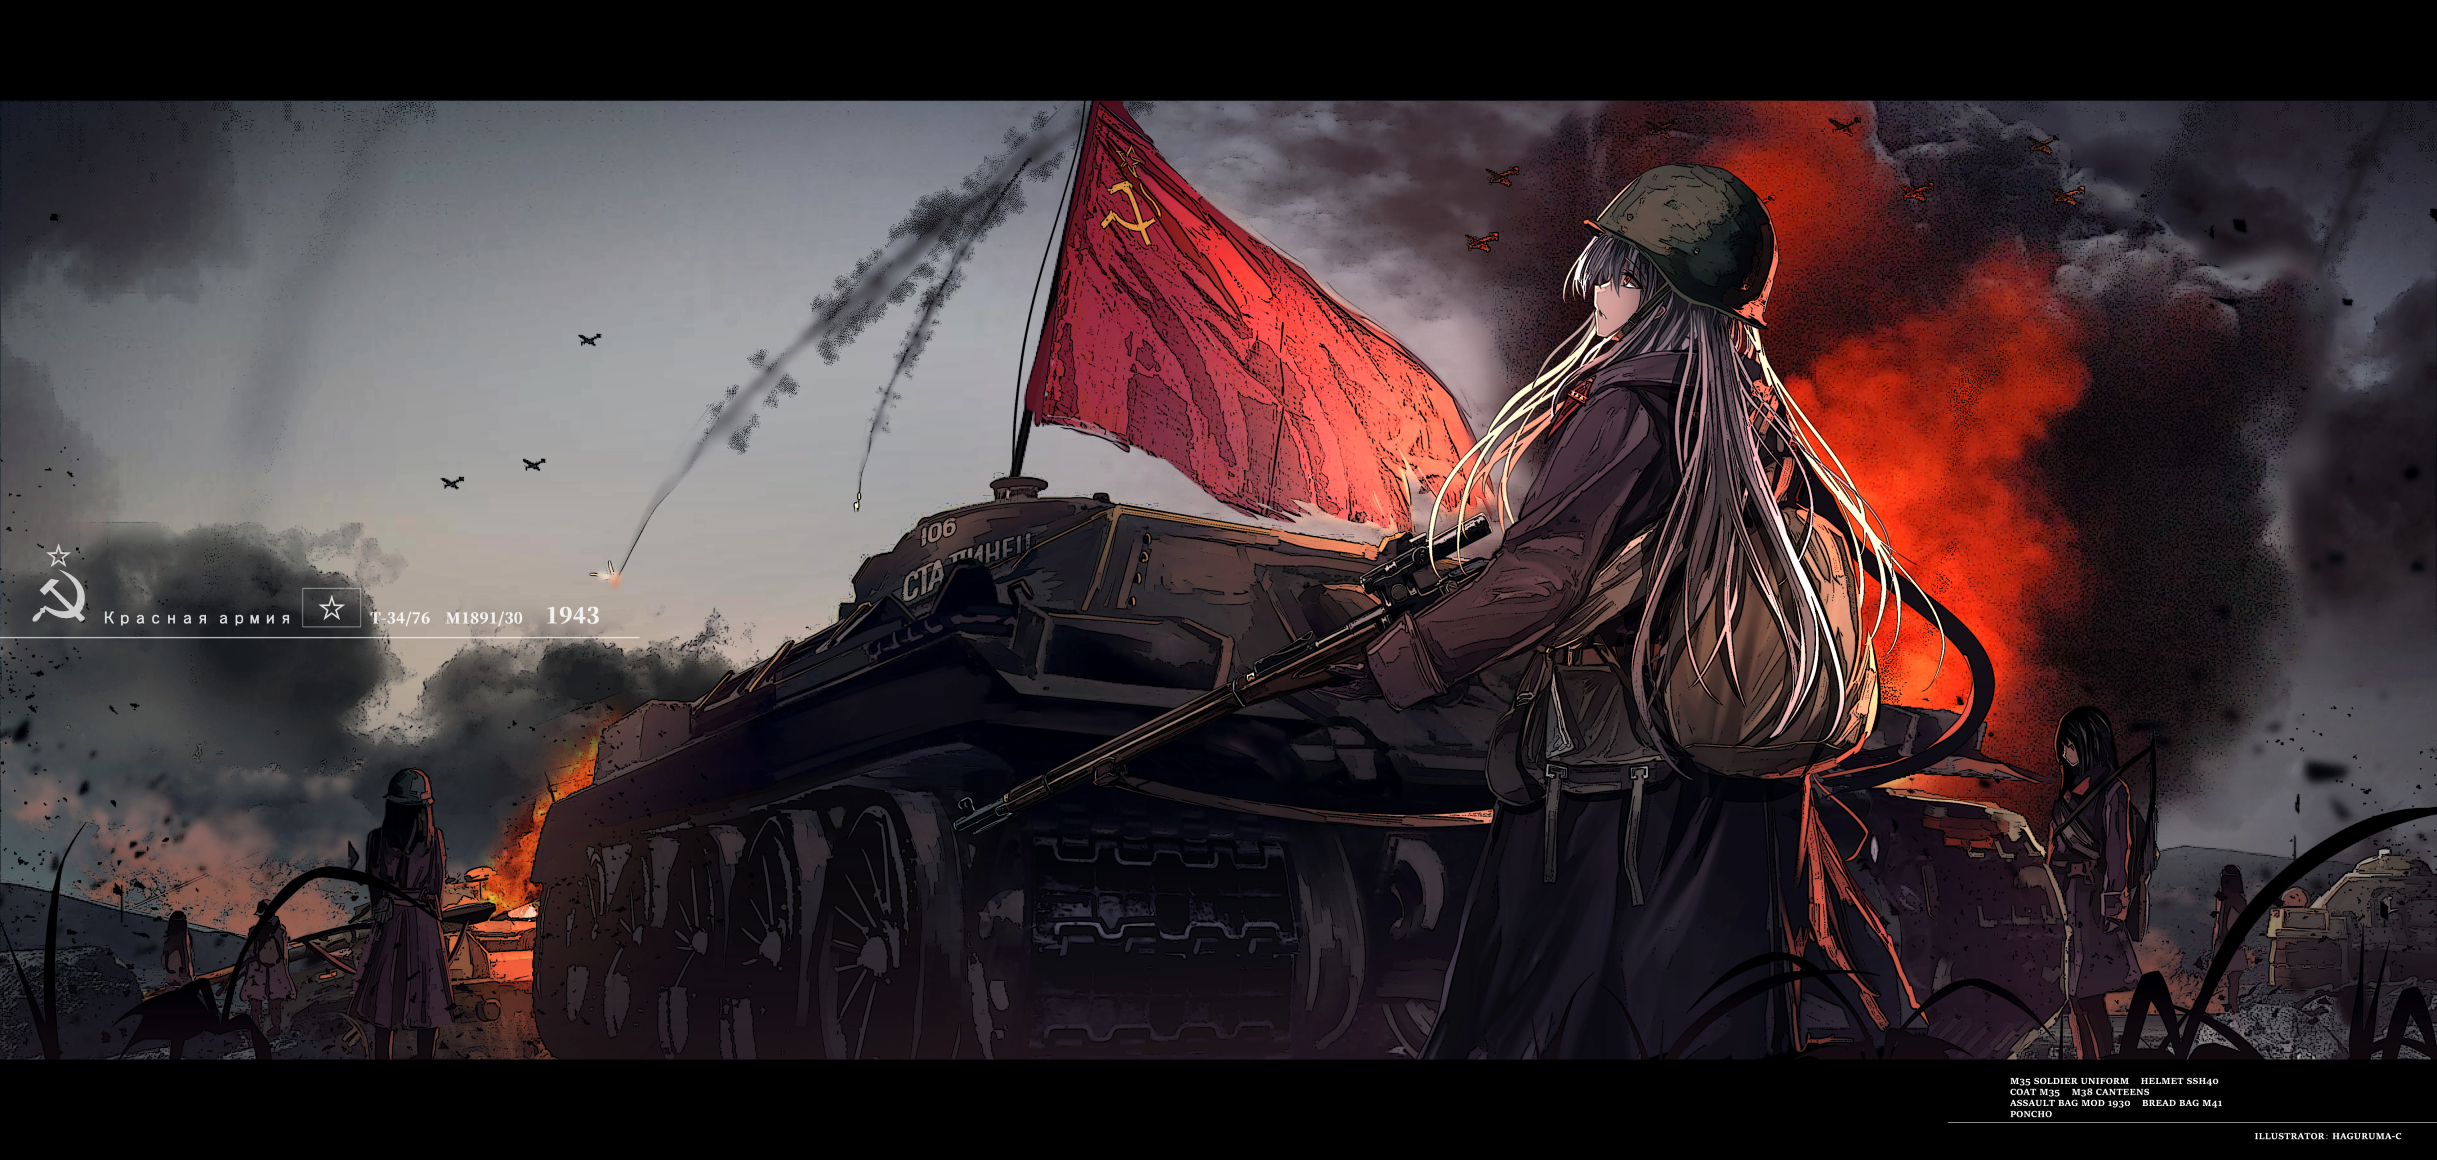 Download Anime Girl With Soviet Union Flag Wallpaper | Wallpapers.com